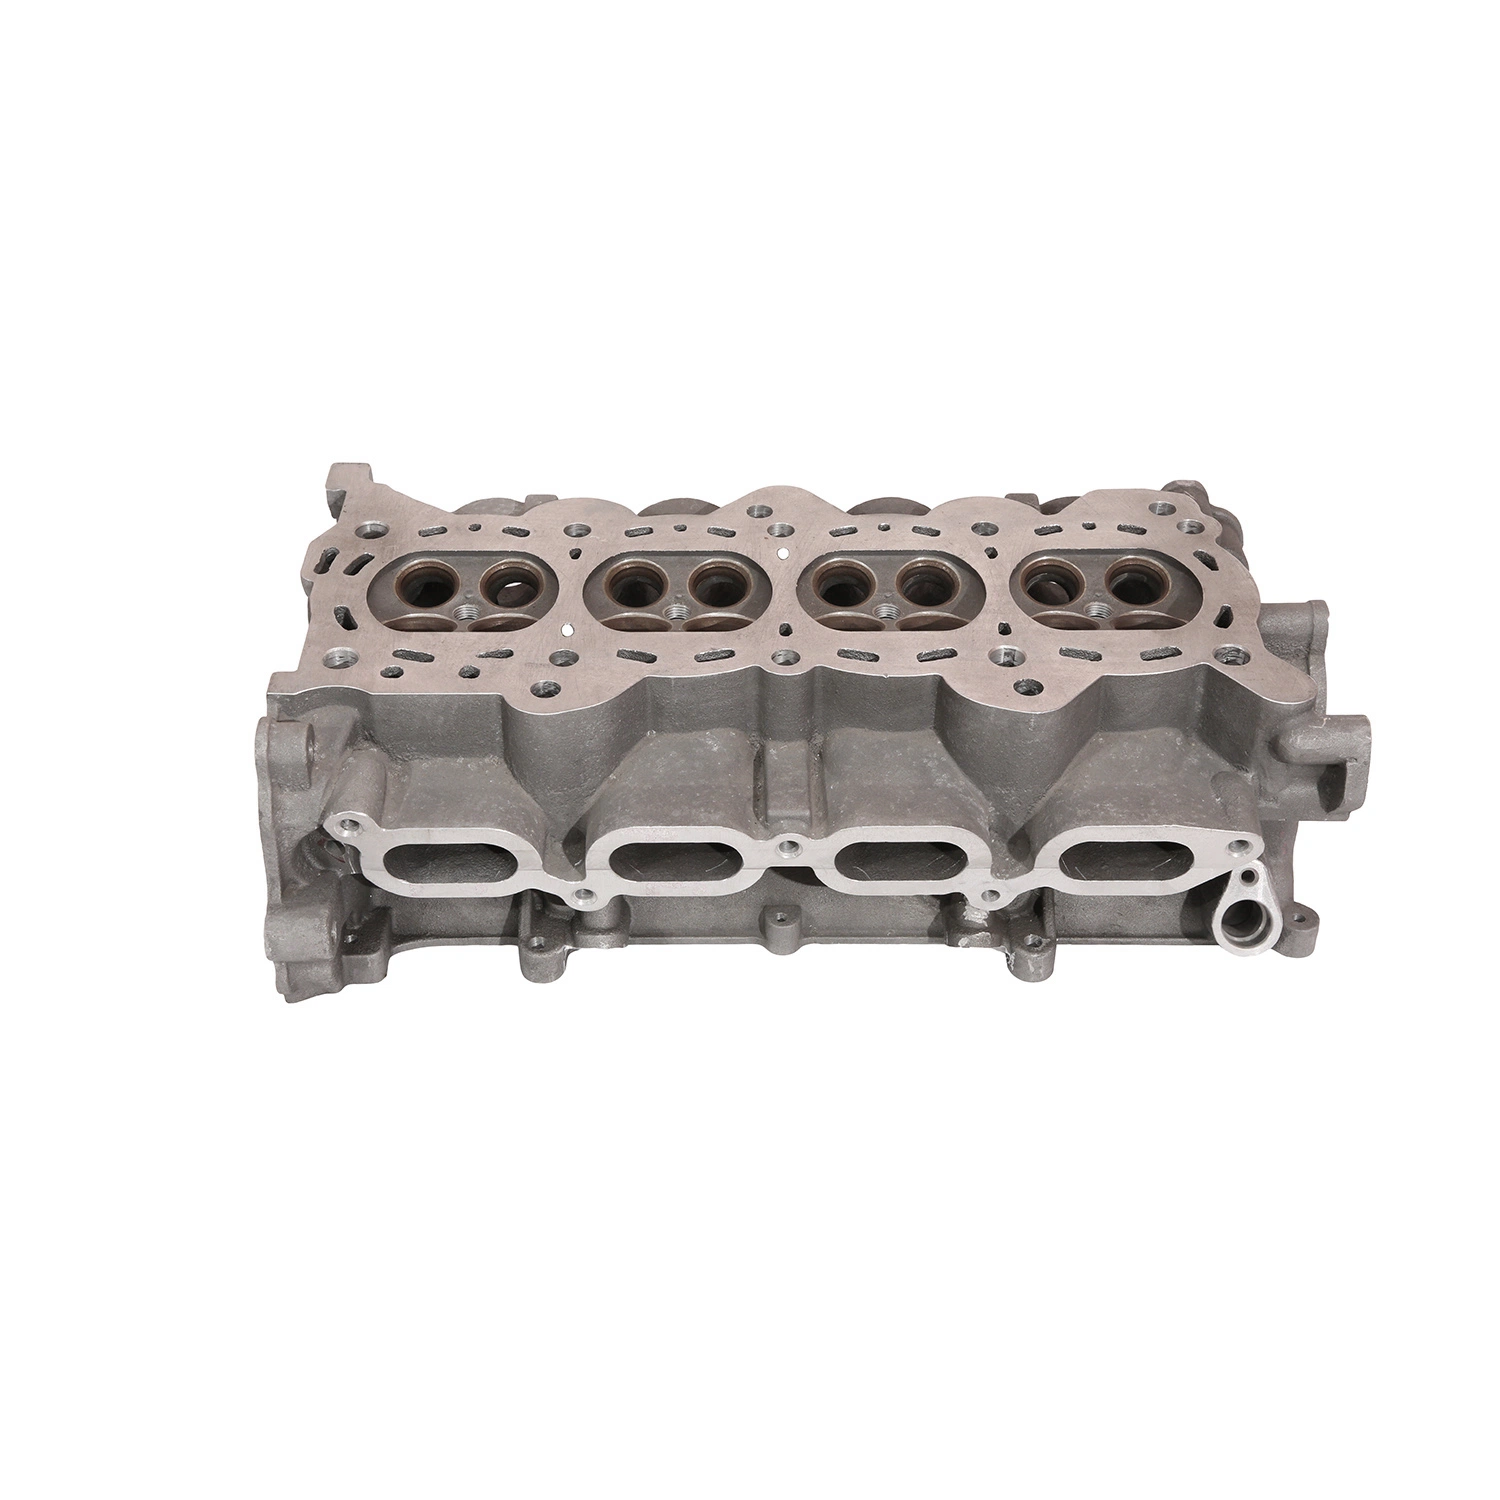 Chinese High-End Hot Sale OEM Customized Auto Parts Cylinder Head Rapid R&D Prototype Aluminum Motor Housing DC Motor Housing